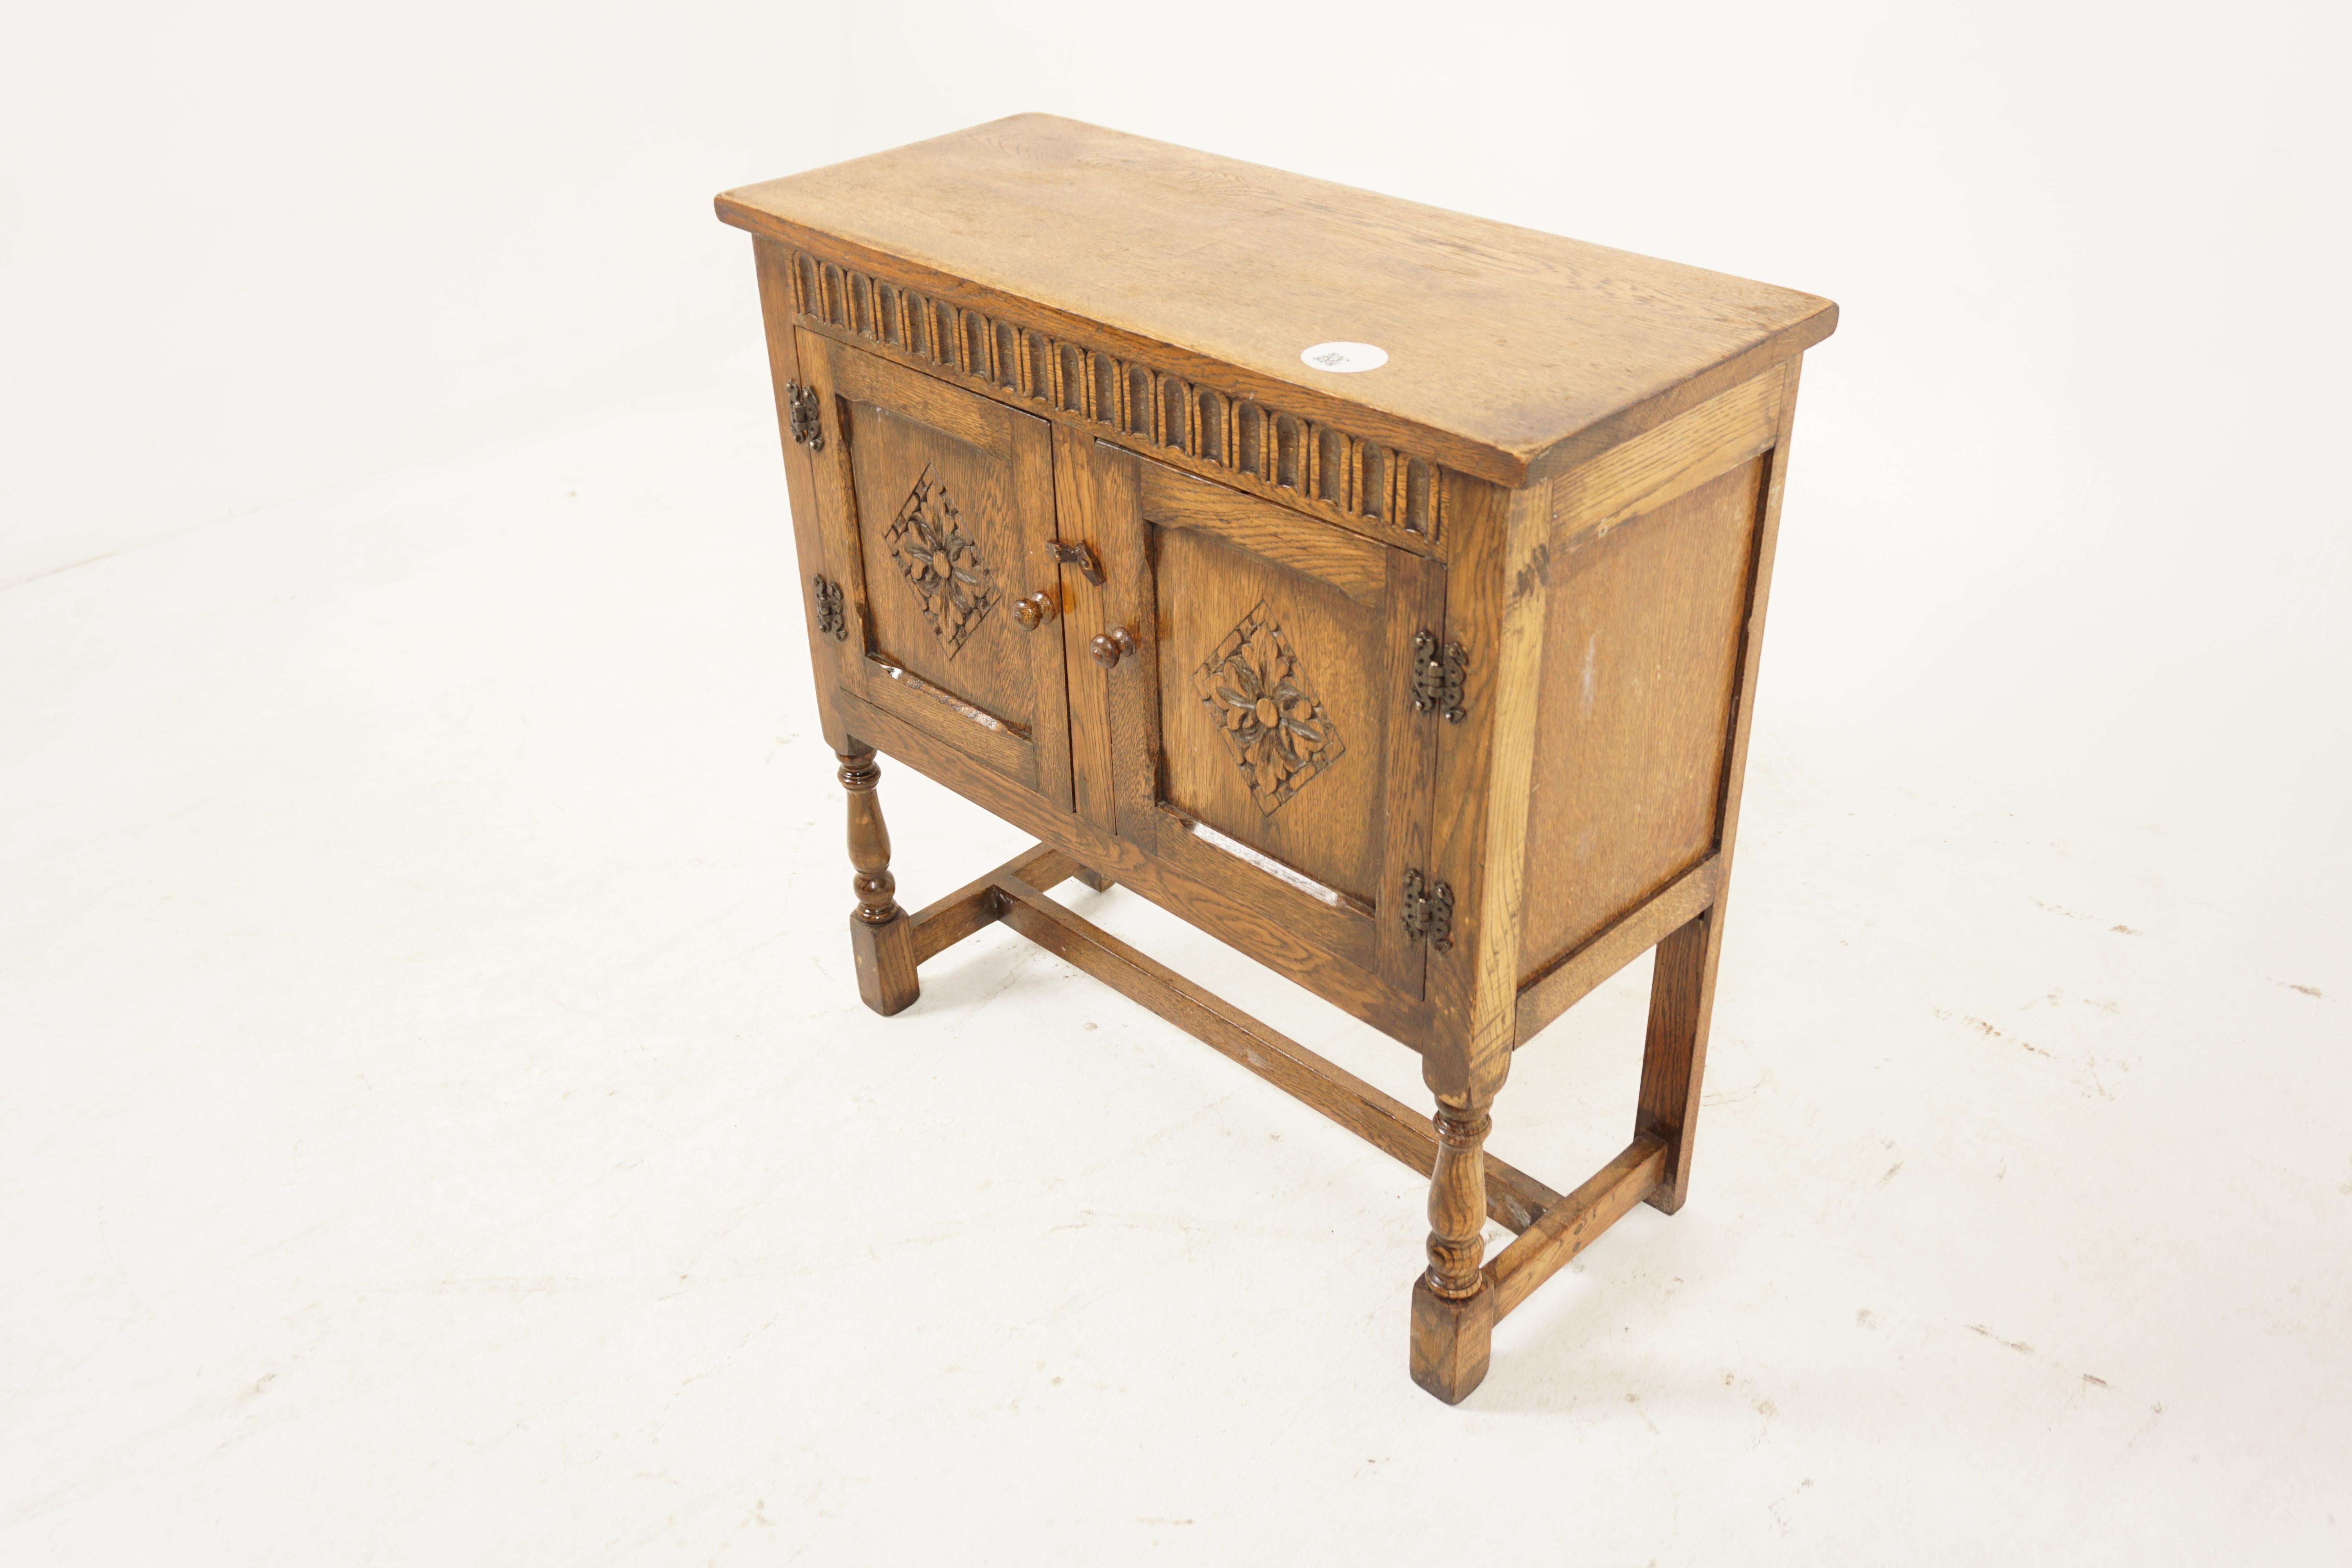 Antique Oak Table, Vintage Small Carved Oak Hall Table, Cupboard, Cabinet, Antique Furniture, Scotland 1930, H1078

+ Scotland 1930
+ Solid Oak
+ Original Finish
+ Solid oak top with carved frieze underneath 
+ Original carved paralleled doors with